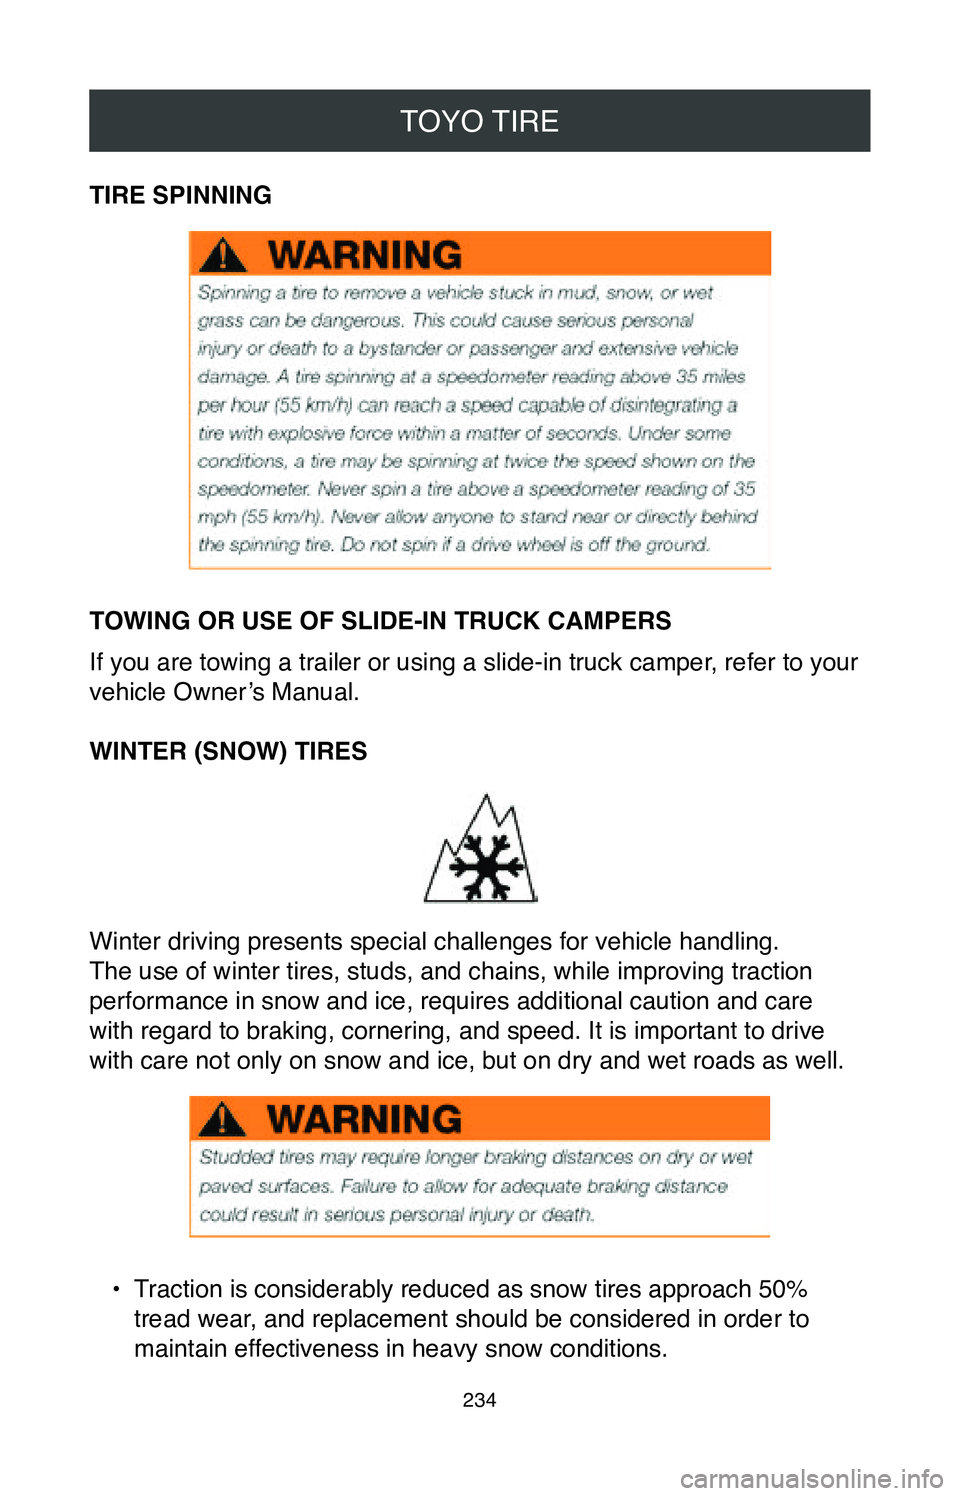 TOYOTA MIRAI 2020  Warranties & Maintenance Guides (in English) TOYO TIRE
234
TIRE SPINNING
TOWING OR USE OF SLIDE-IN TRUCK CAMPERS
If you are towing a trailer or using a slide-in truck camper, refer to your 
vehicle Owner’s Manual.
WINTER (SNOW) TIRES
Winter dr